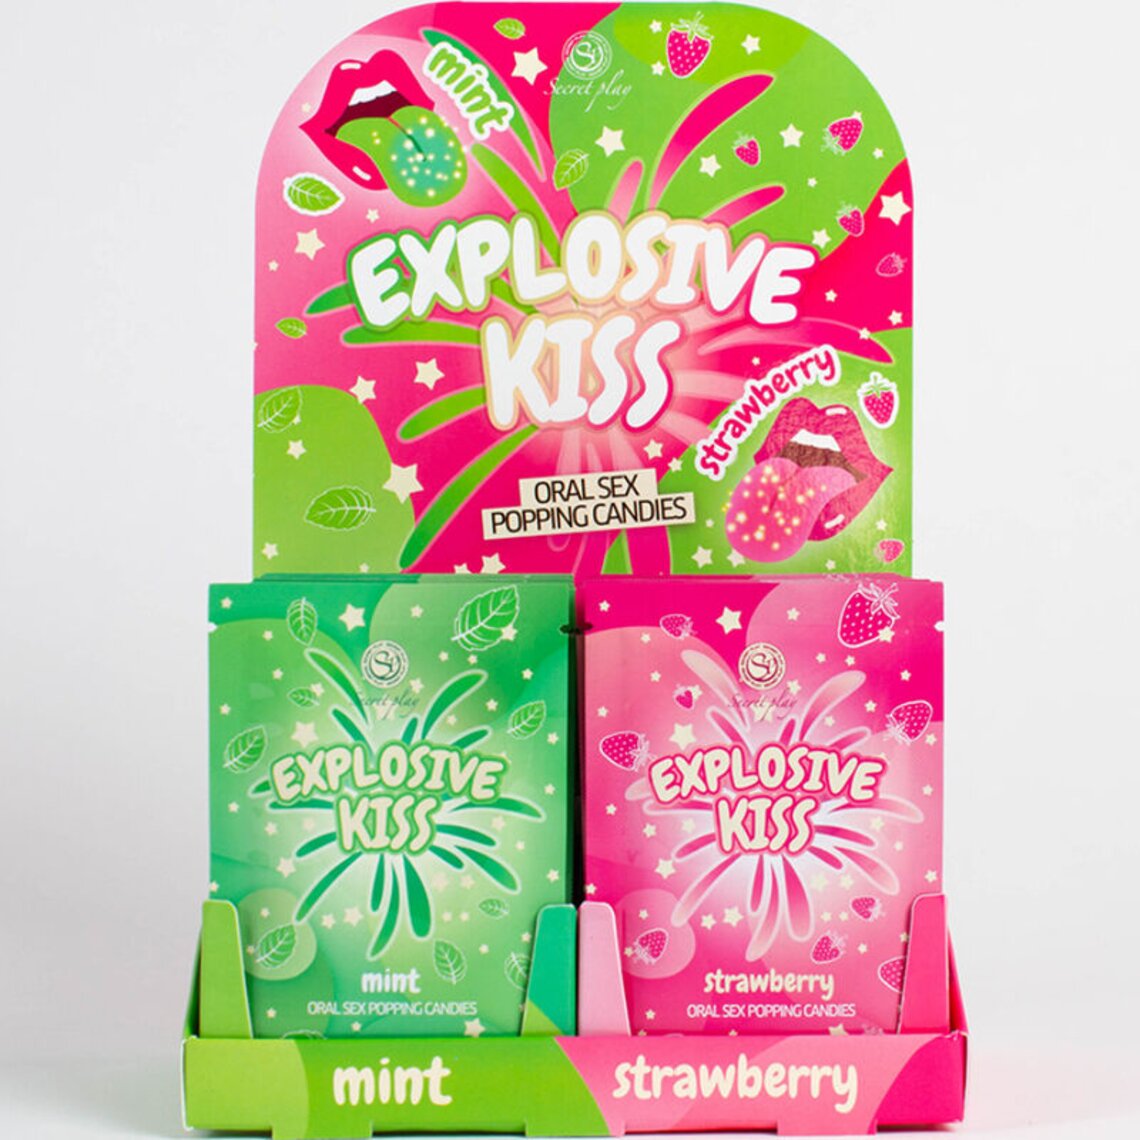 Secret Play Explosive Candy Display 48 Units Sex Candies 4701